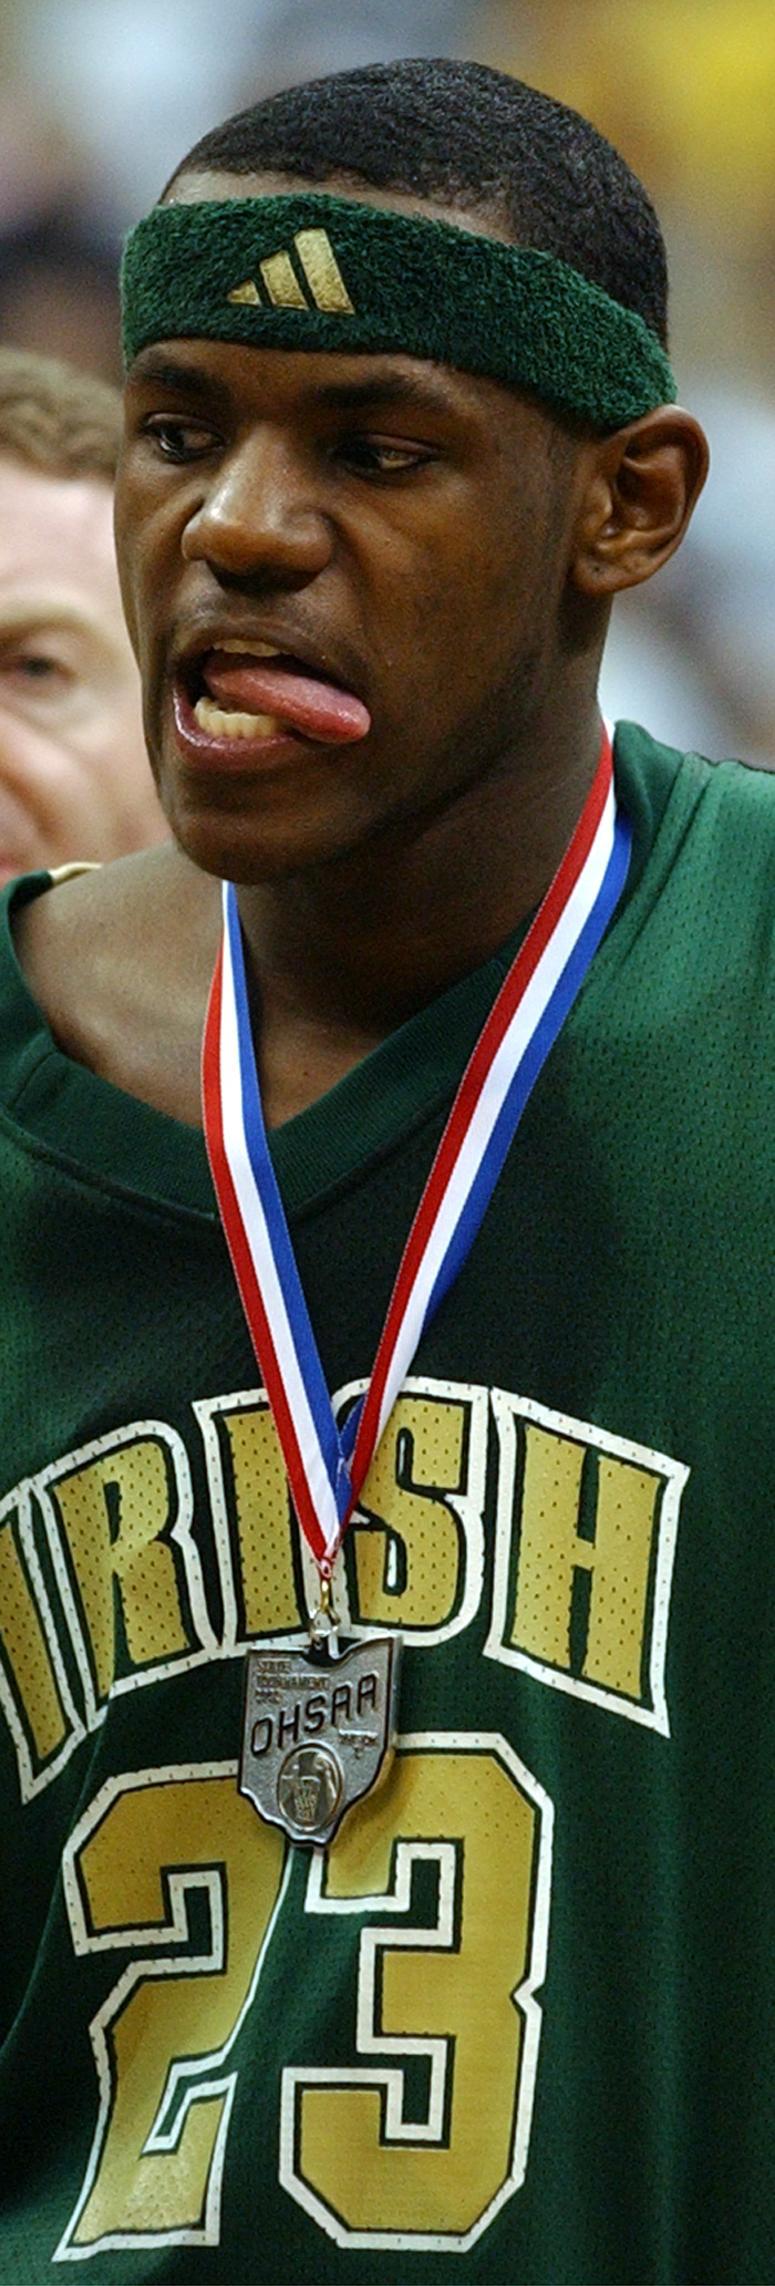 March 23, 2002 Columbus, OH. Value City Arena.....LeBron James of St. Vincent St. Mary receives the second place OHSAA medal during team trophy ceremonies held midcourt at Value City Arena.(Roadell Hickman/The Plain Dealer)  